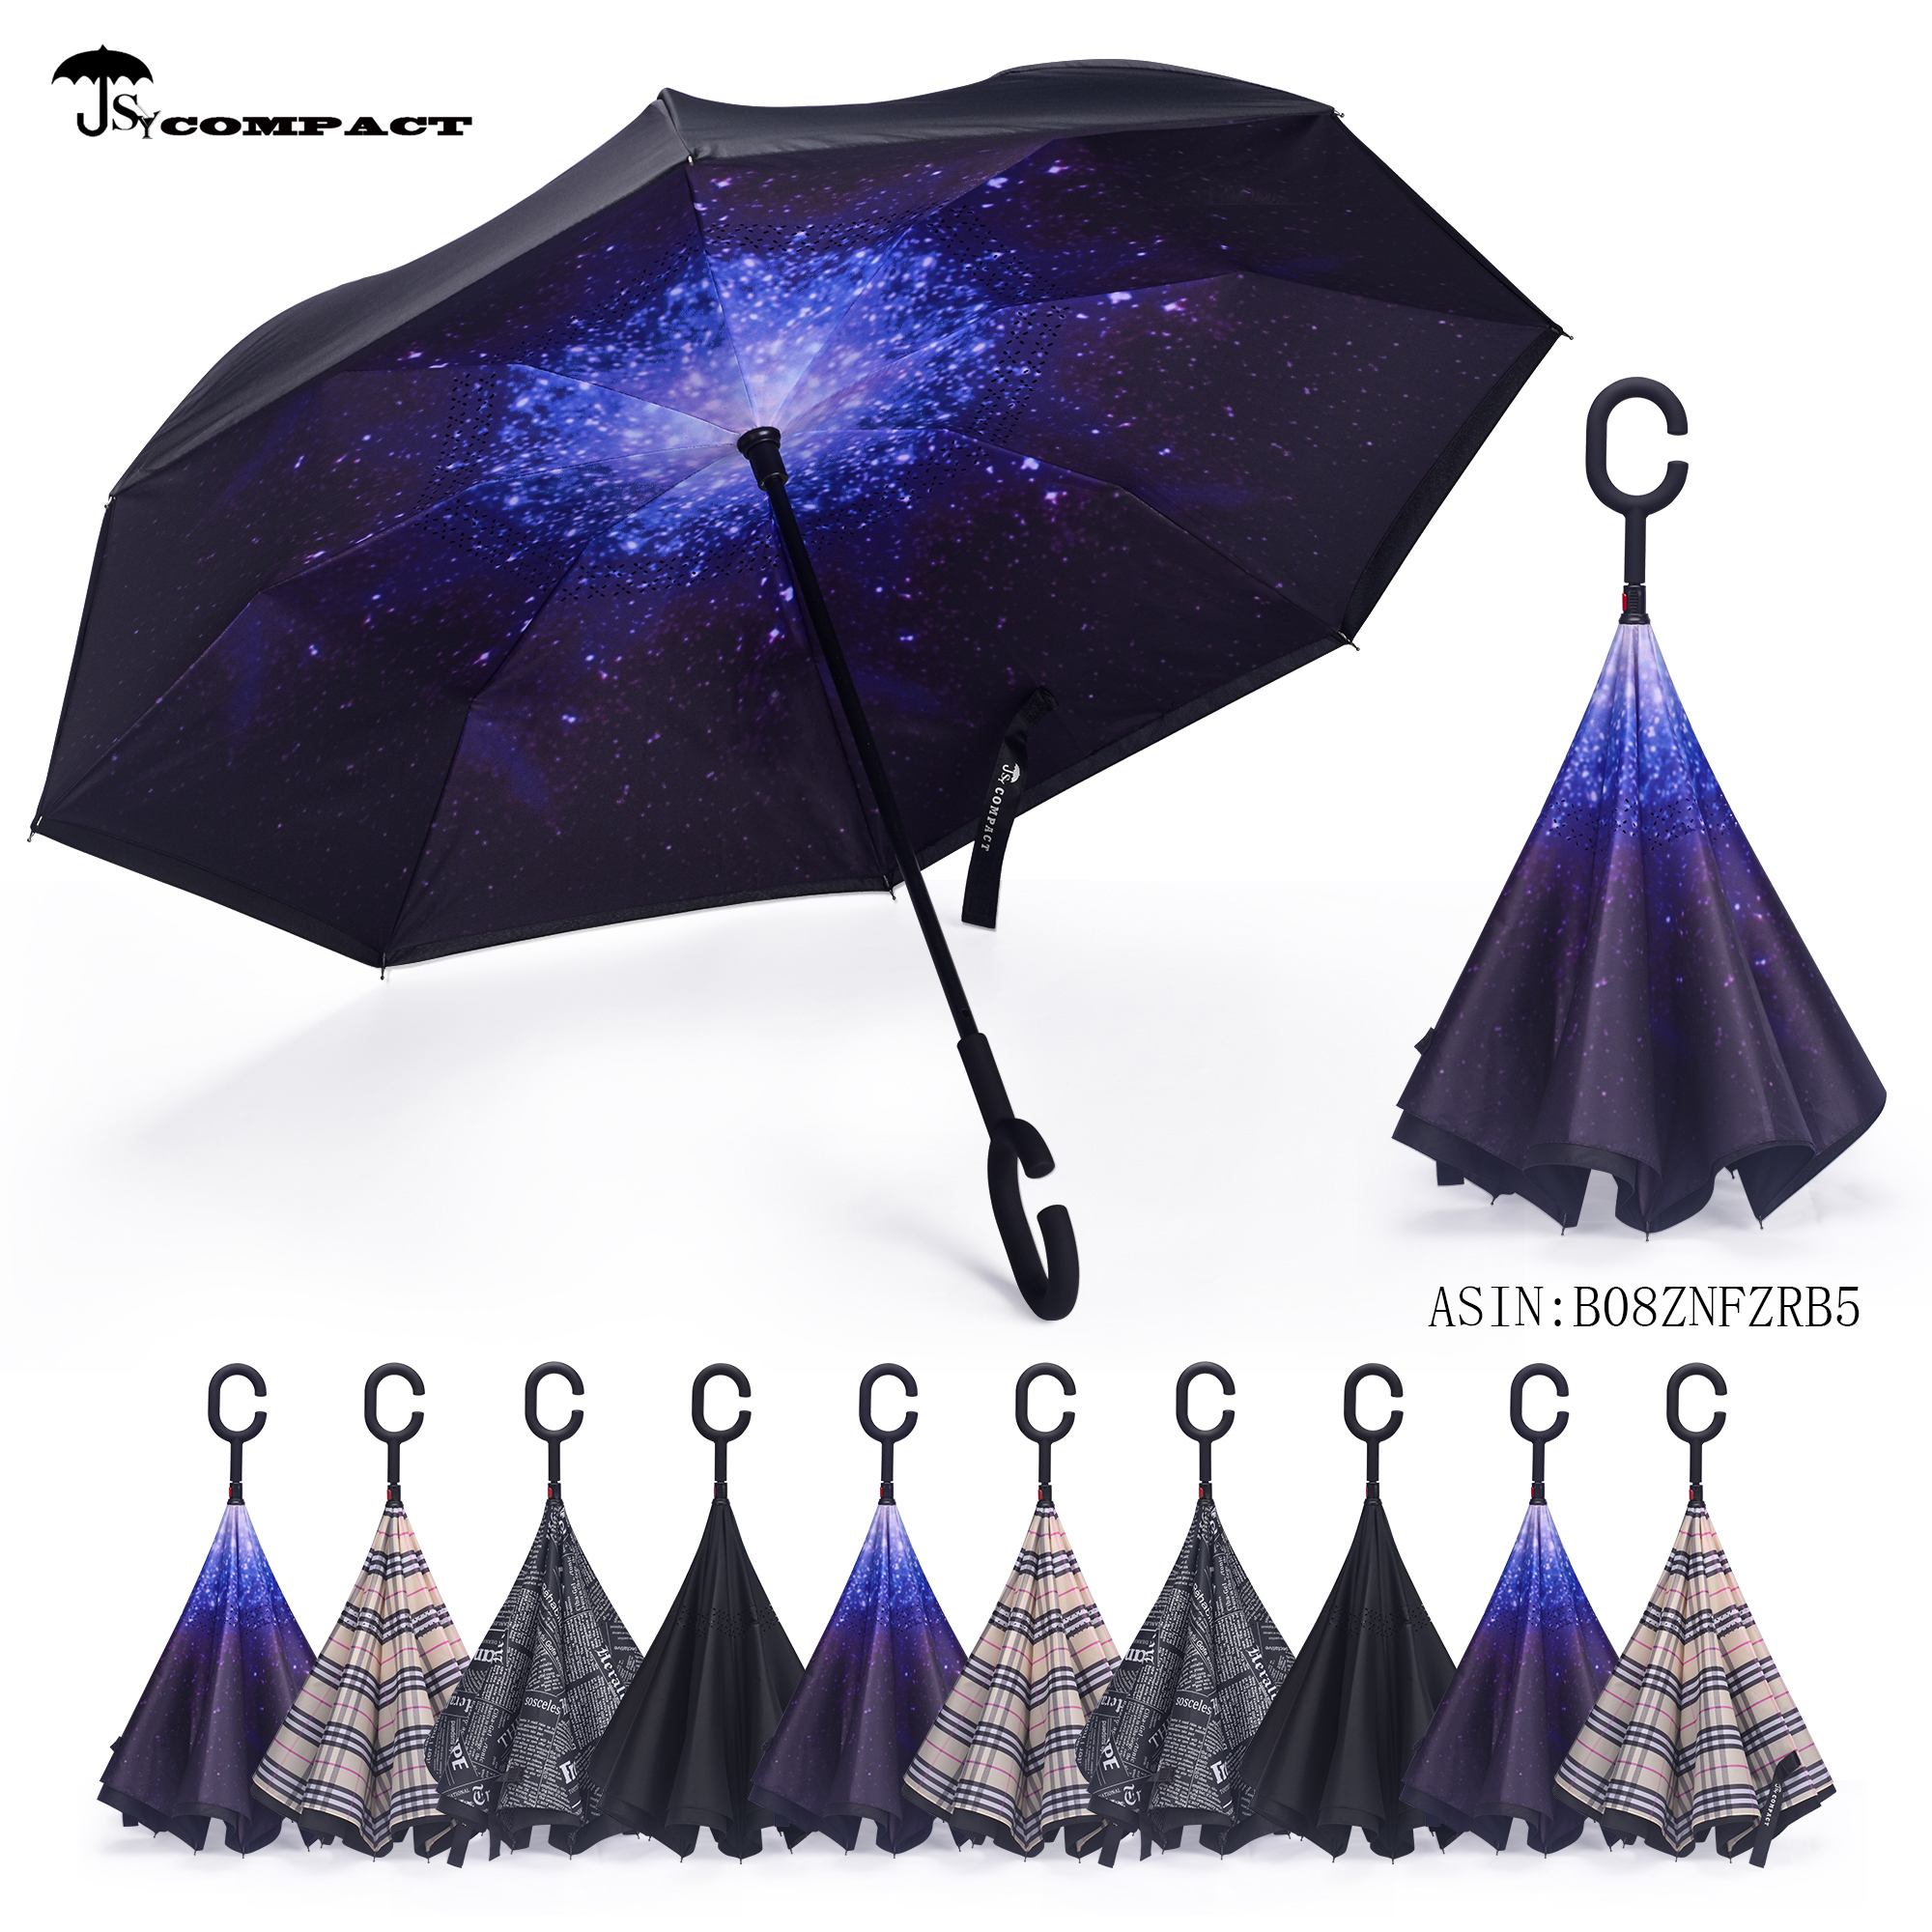 SY COMPACT Inverted Umbrella Windproof Double Layer Reverse Umbrellas with C-Shaped Handle Straight Umbrella for Car Rain-factory shop